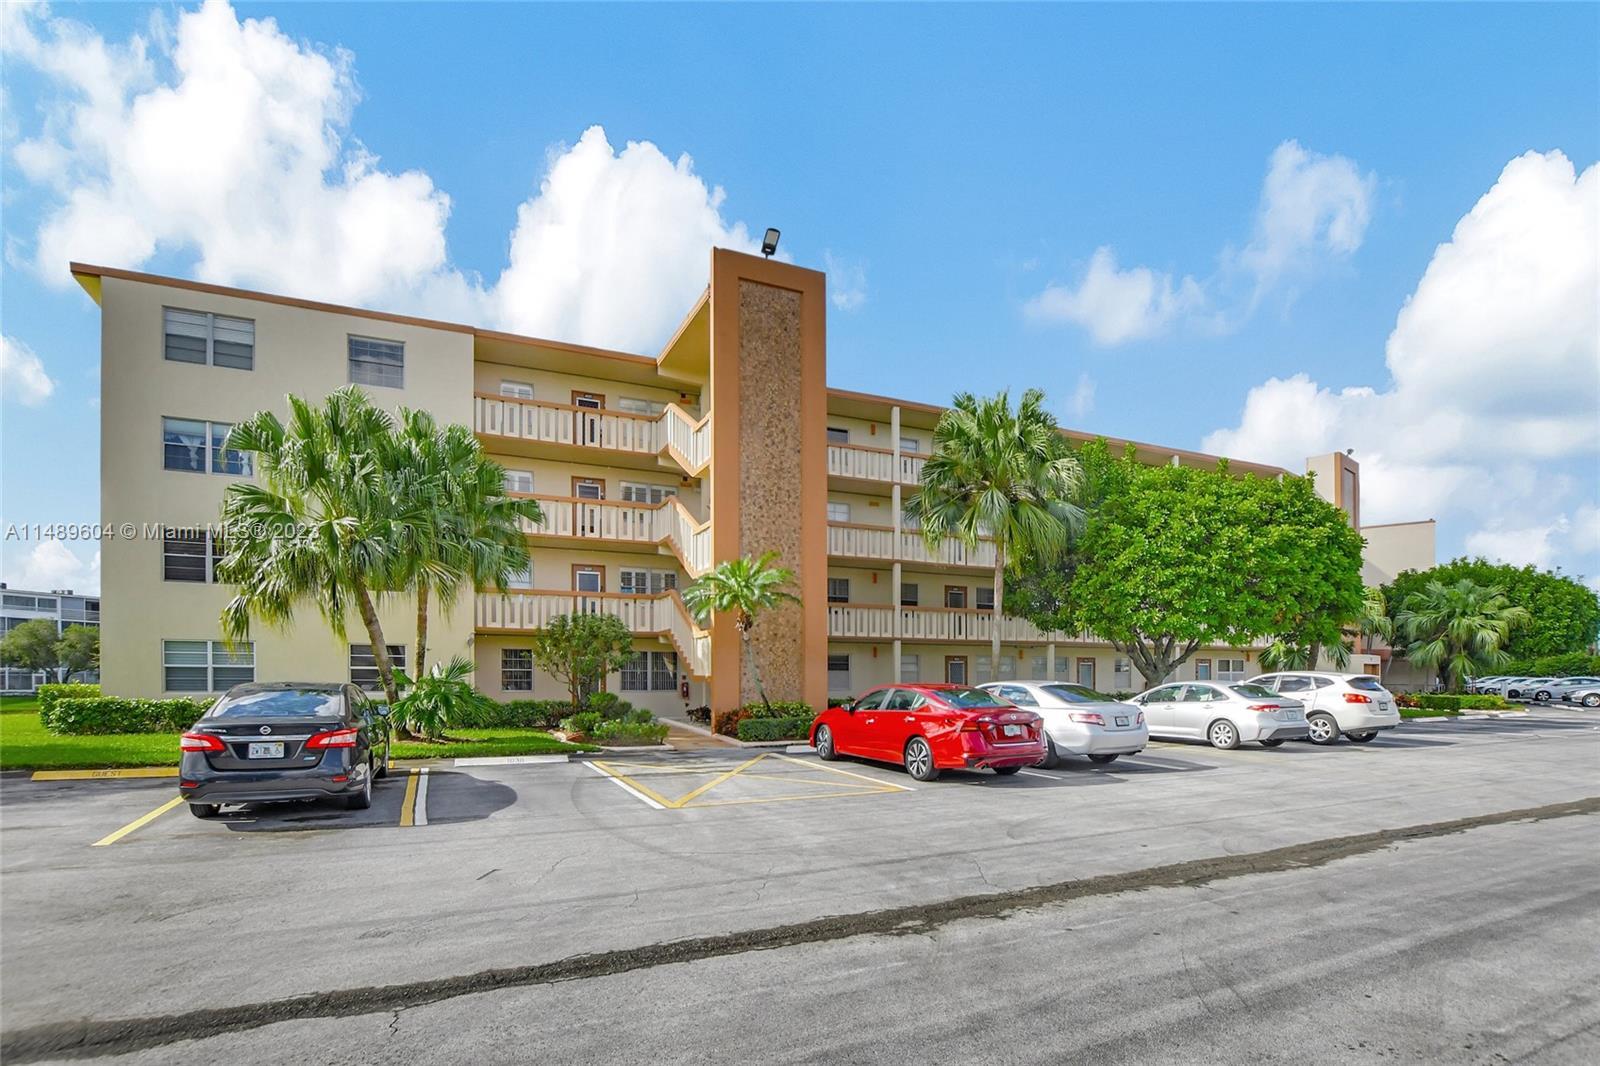 Third floor lakefront condo that has been updated and remodeled beautifully.  This 2 bedroom unit in